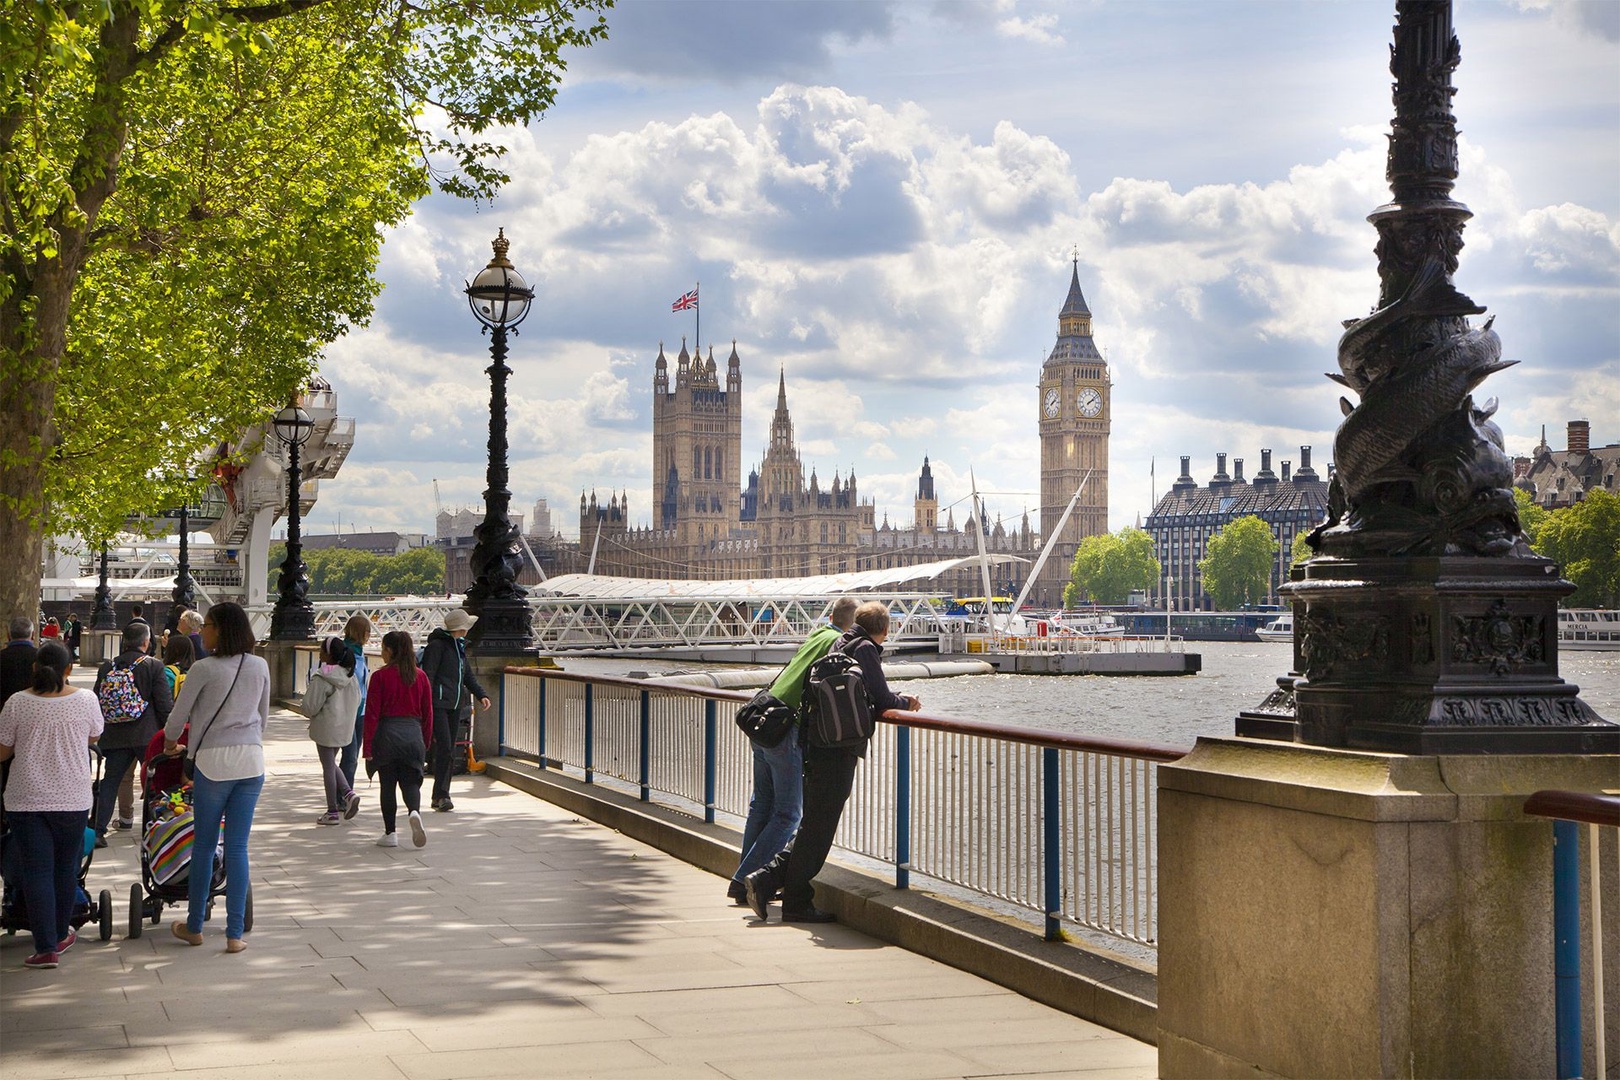 Stroll along the Thames to see the London sights